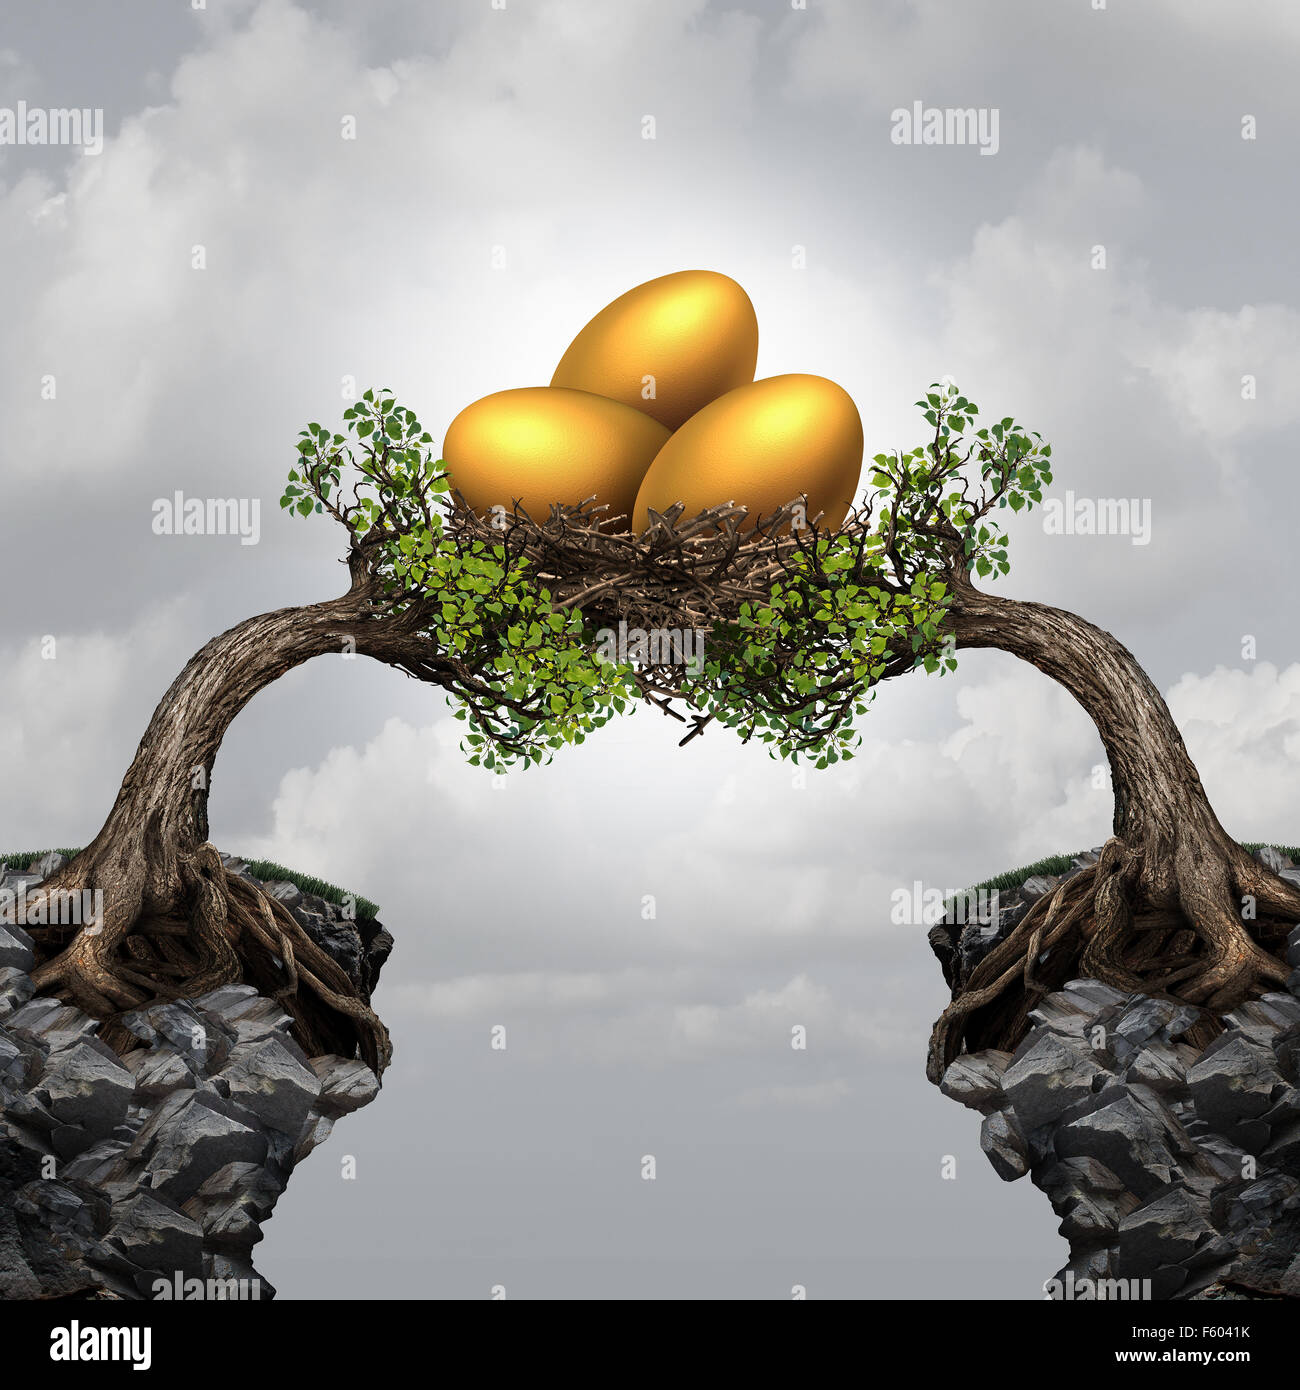 Investment group securitty business concept as two distant trees on cliffs coming together to unite and support a nest full of golden eggs as a symbol and financial metaphor for team investing or global funds advice. Stock Photo